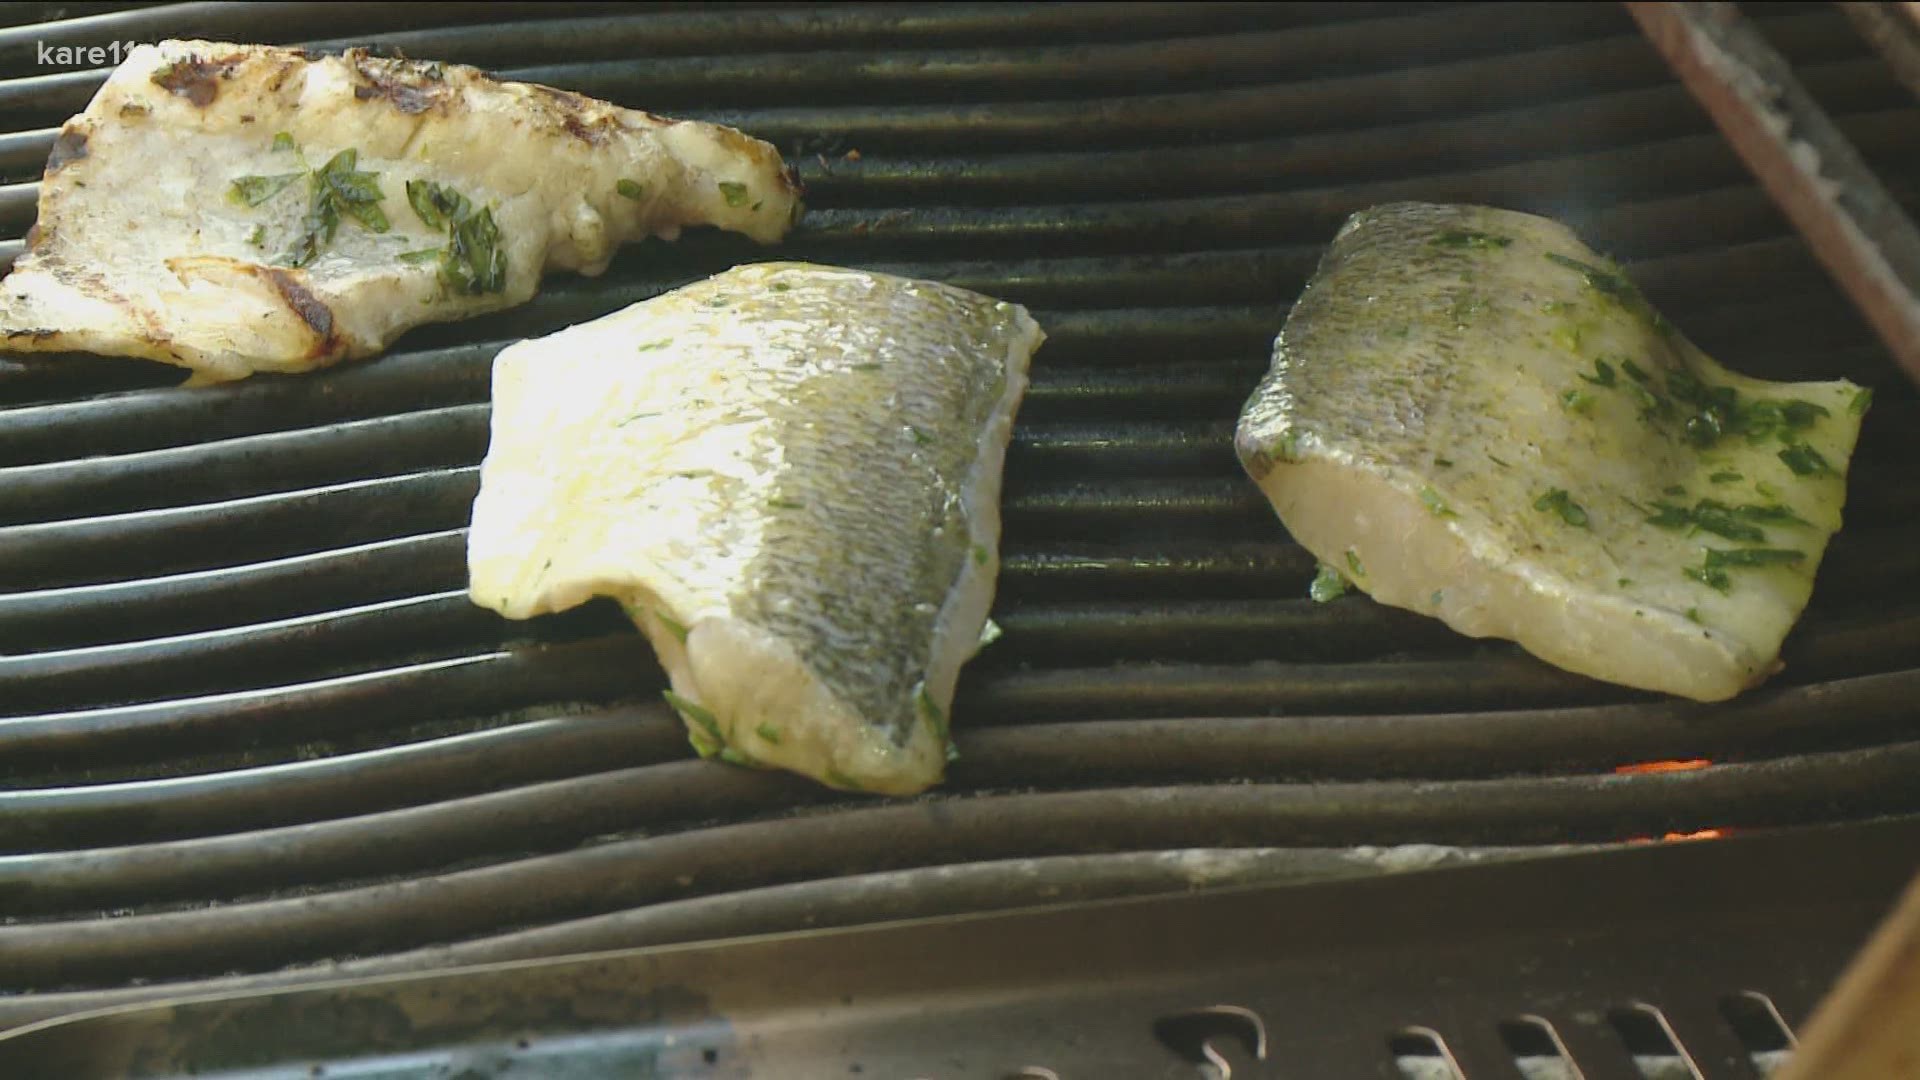 John Mihajlov, Chief Operating Officer for Finnegans Brew Co., shares his secrets to achieving the perfect grilled dinner.